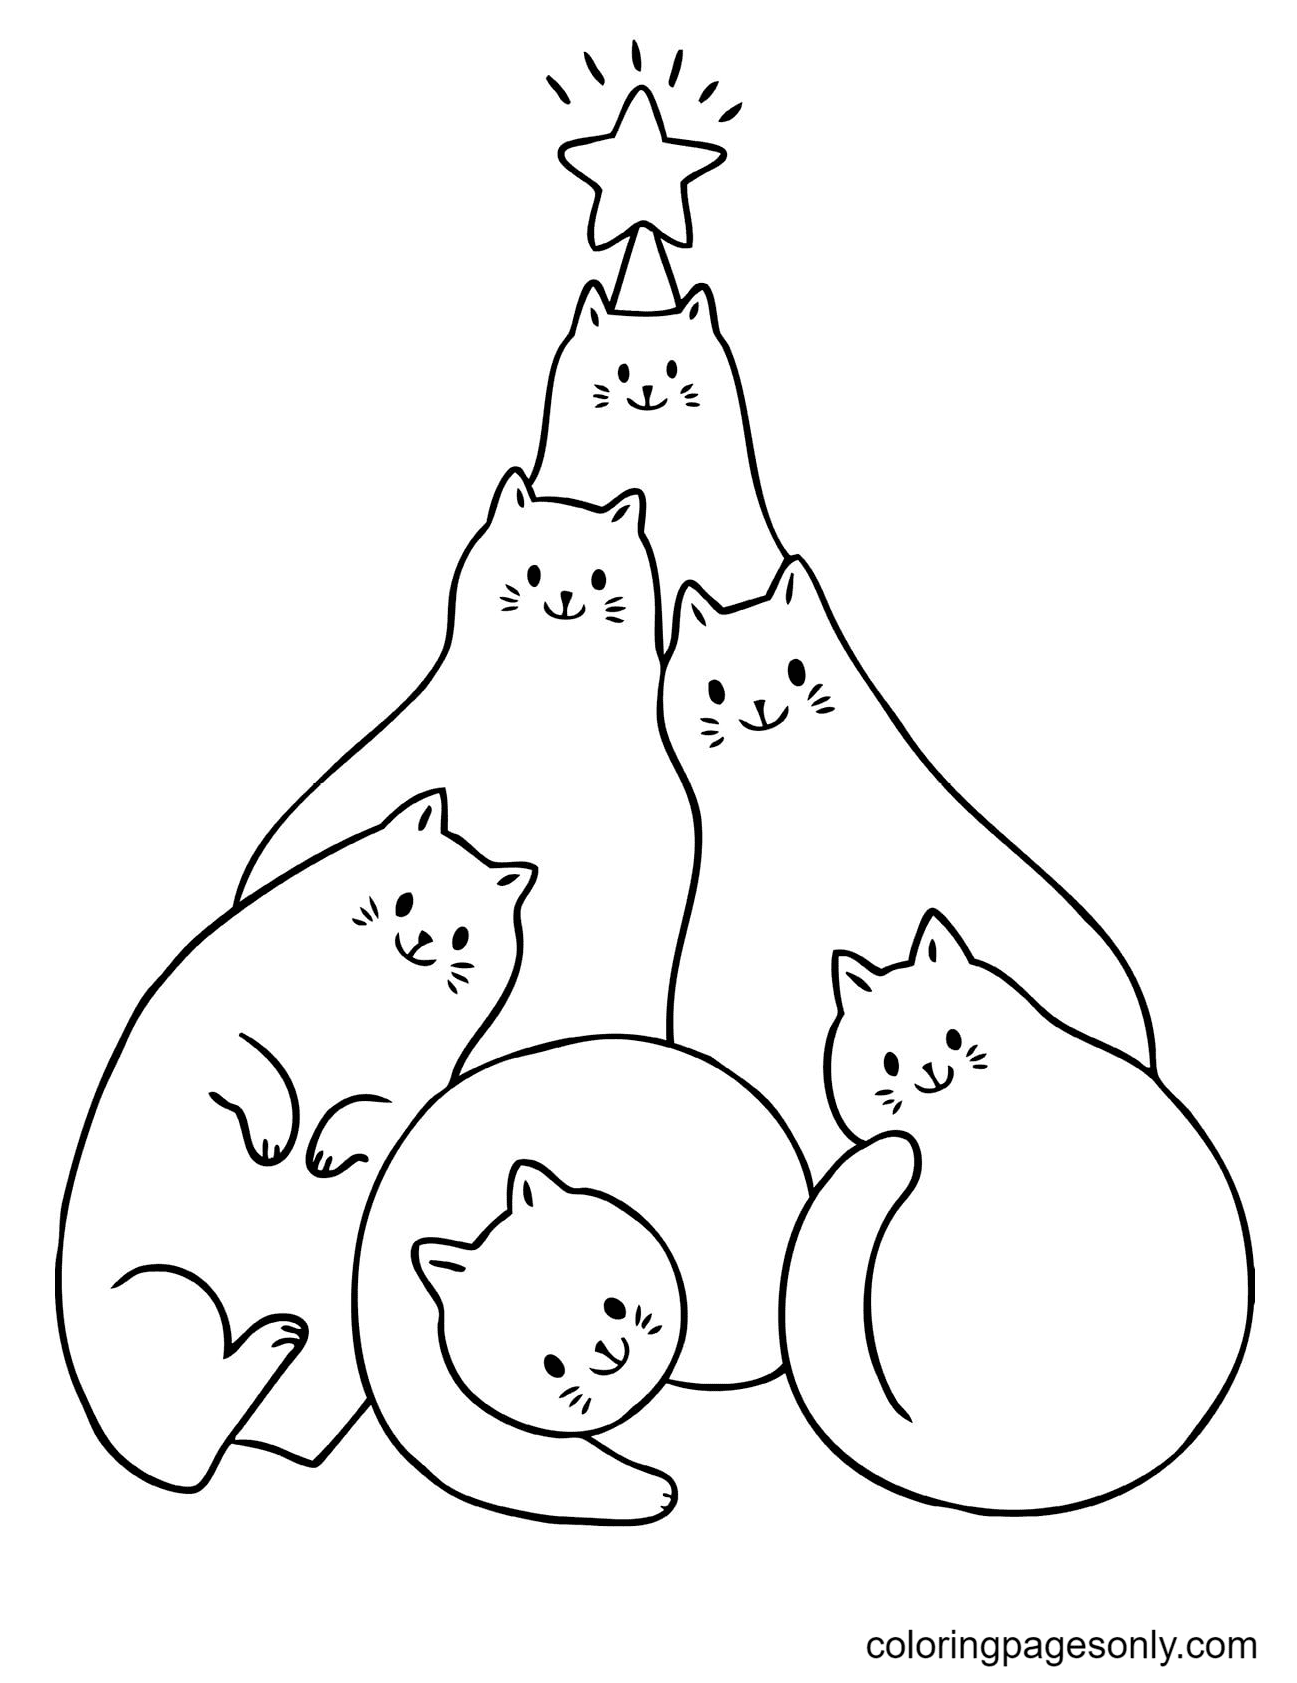 Christmas Tree Made of Cats Coloring Pages